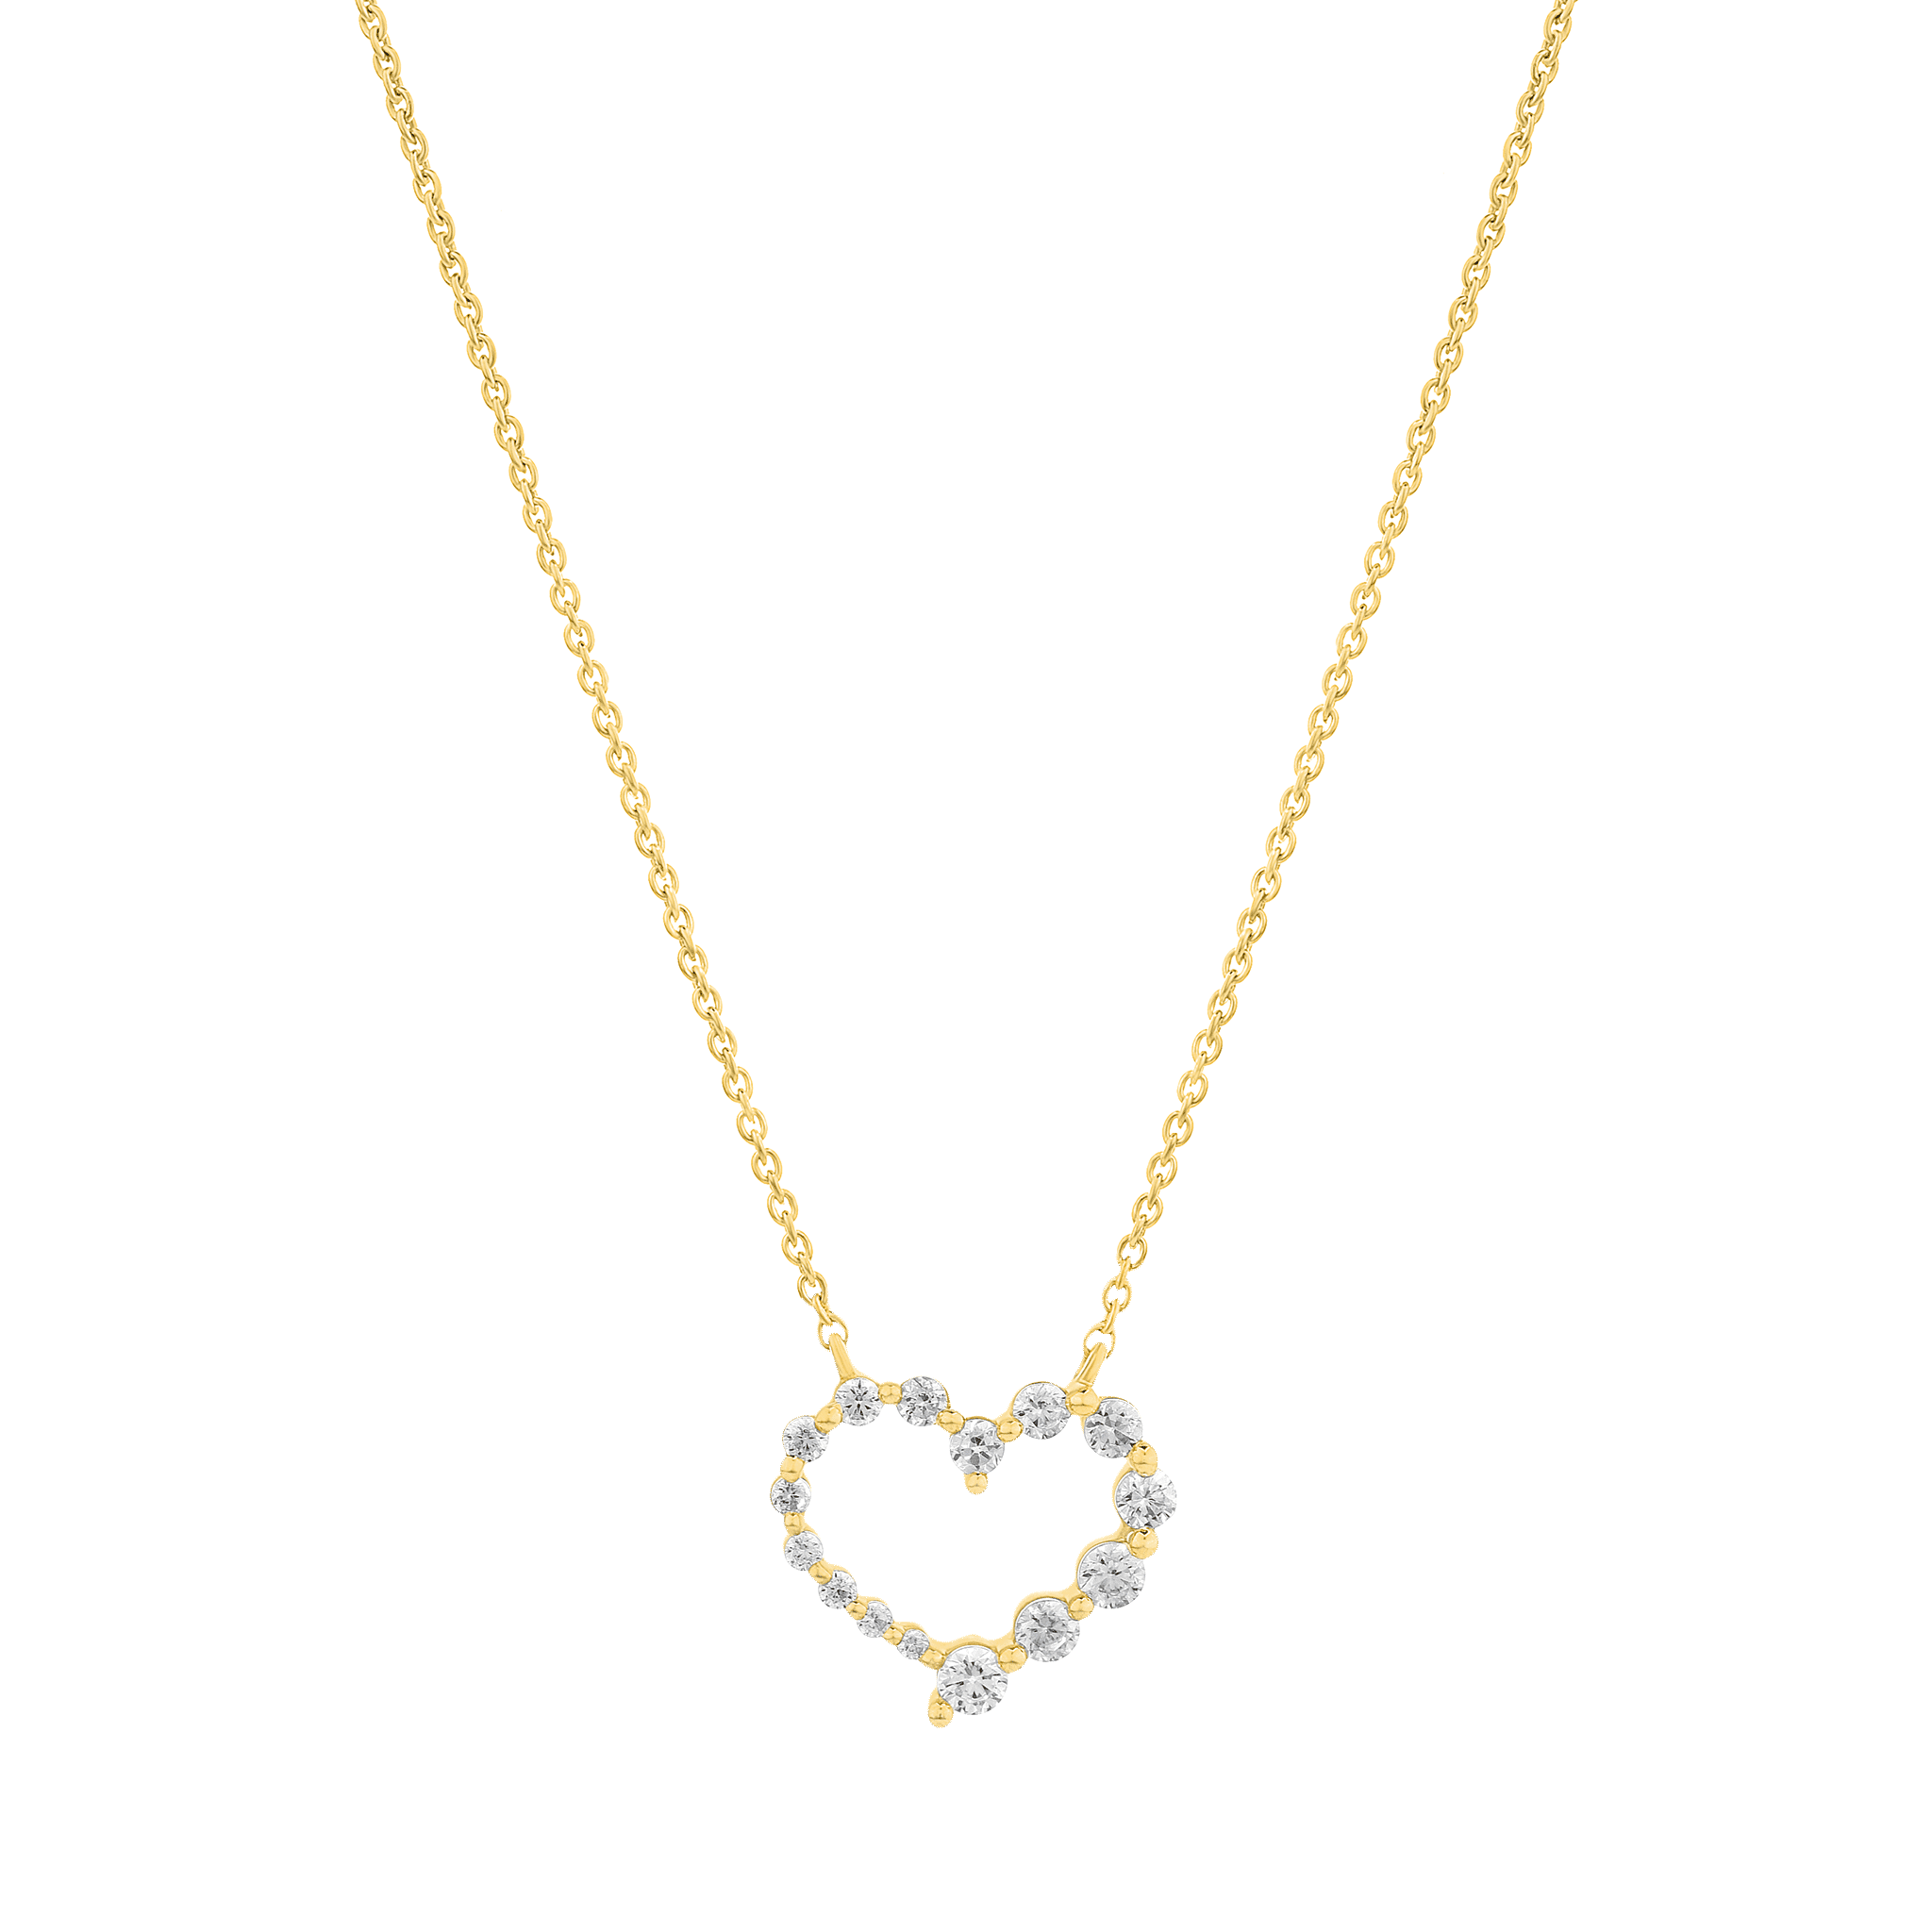 33+ Lovely Heart Necklaces for Couples, Friends & Family